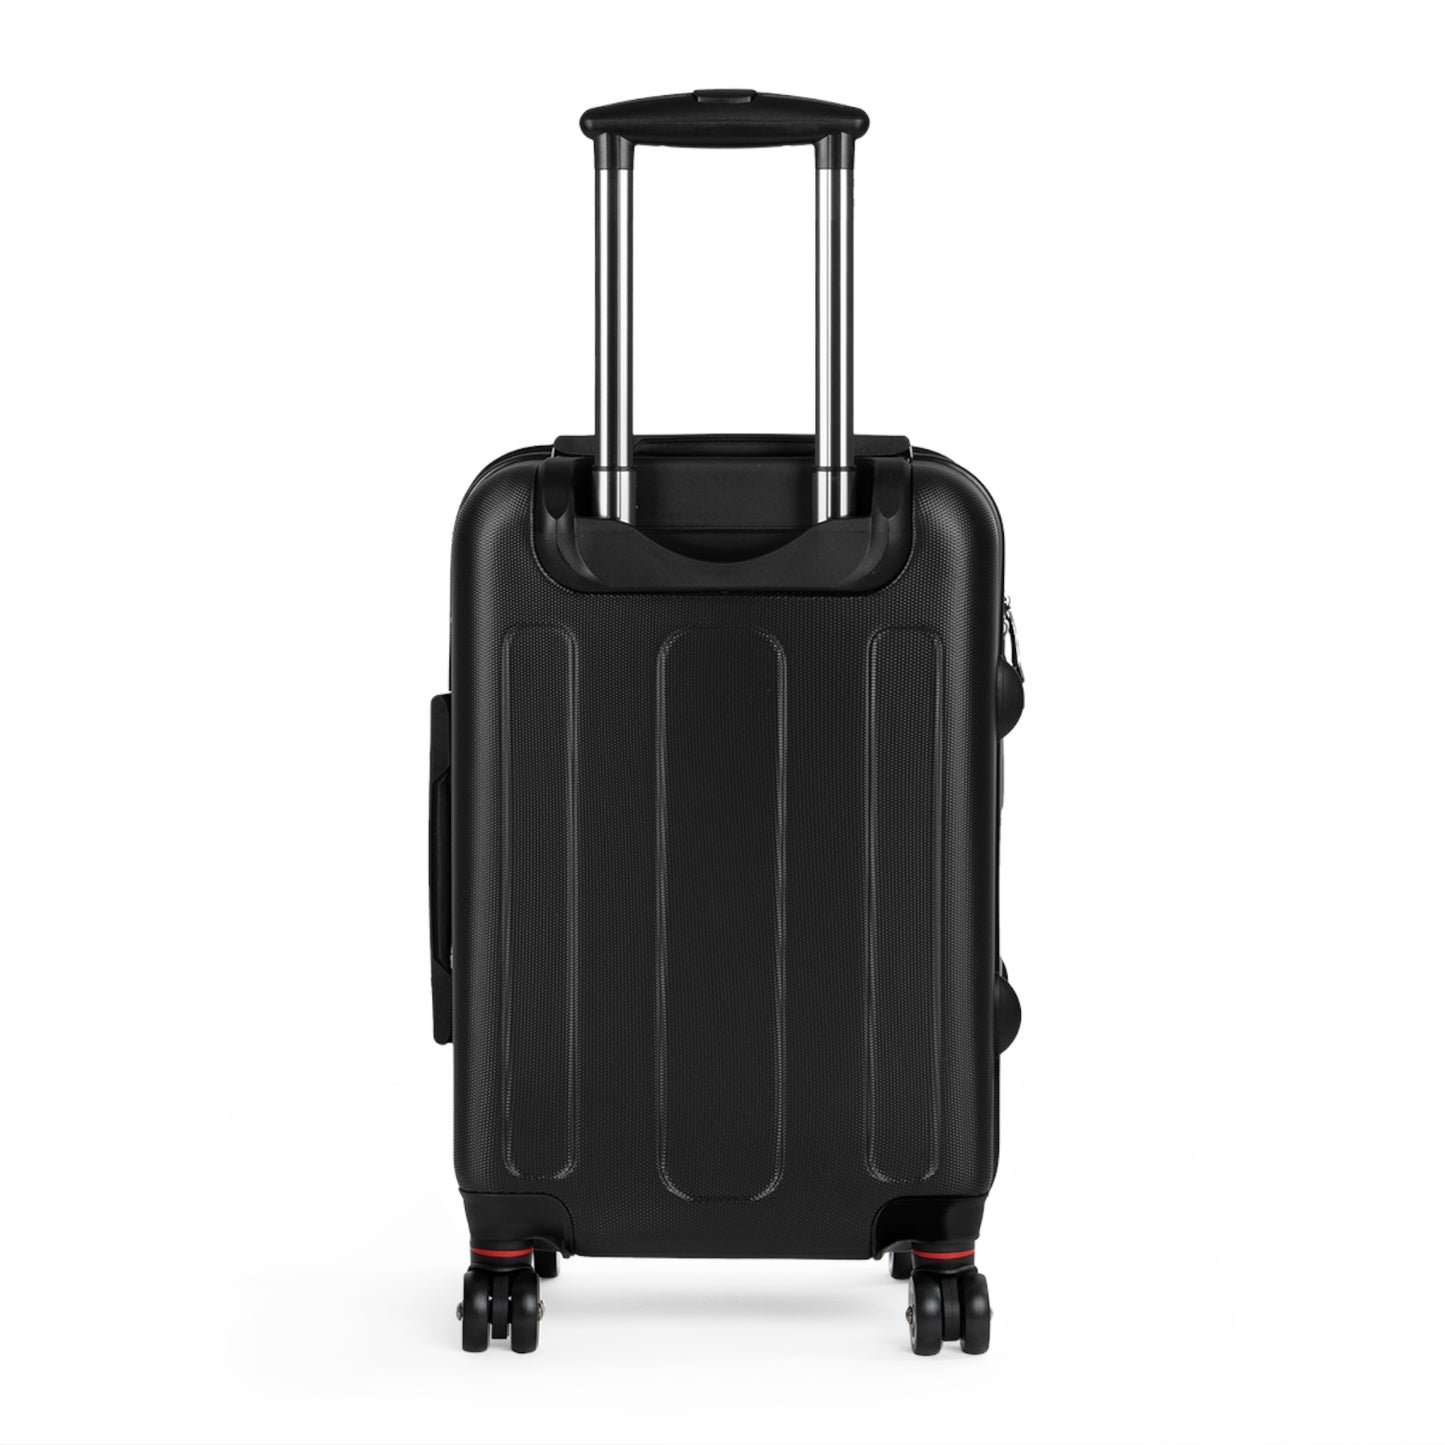 The International Luggage Collection